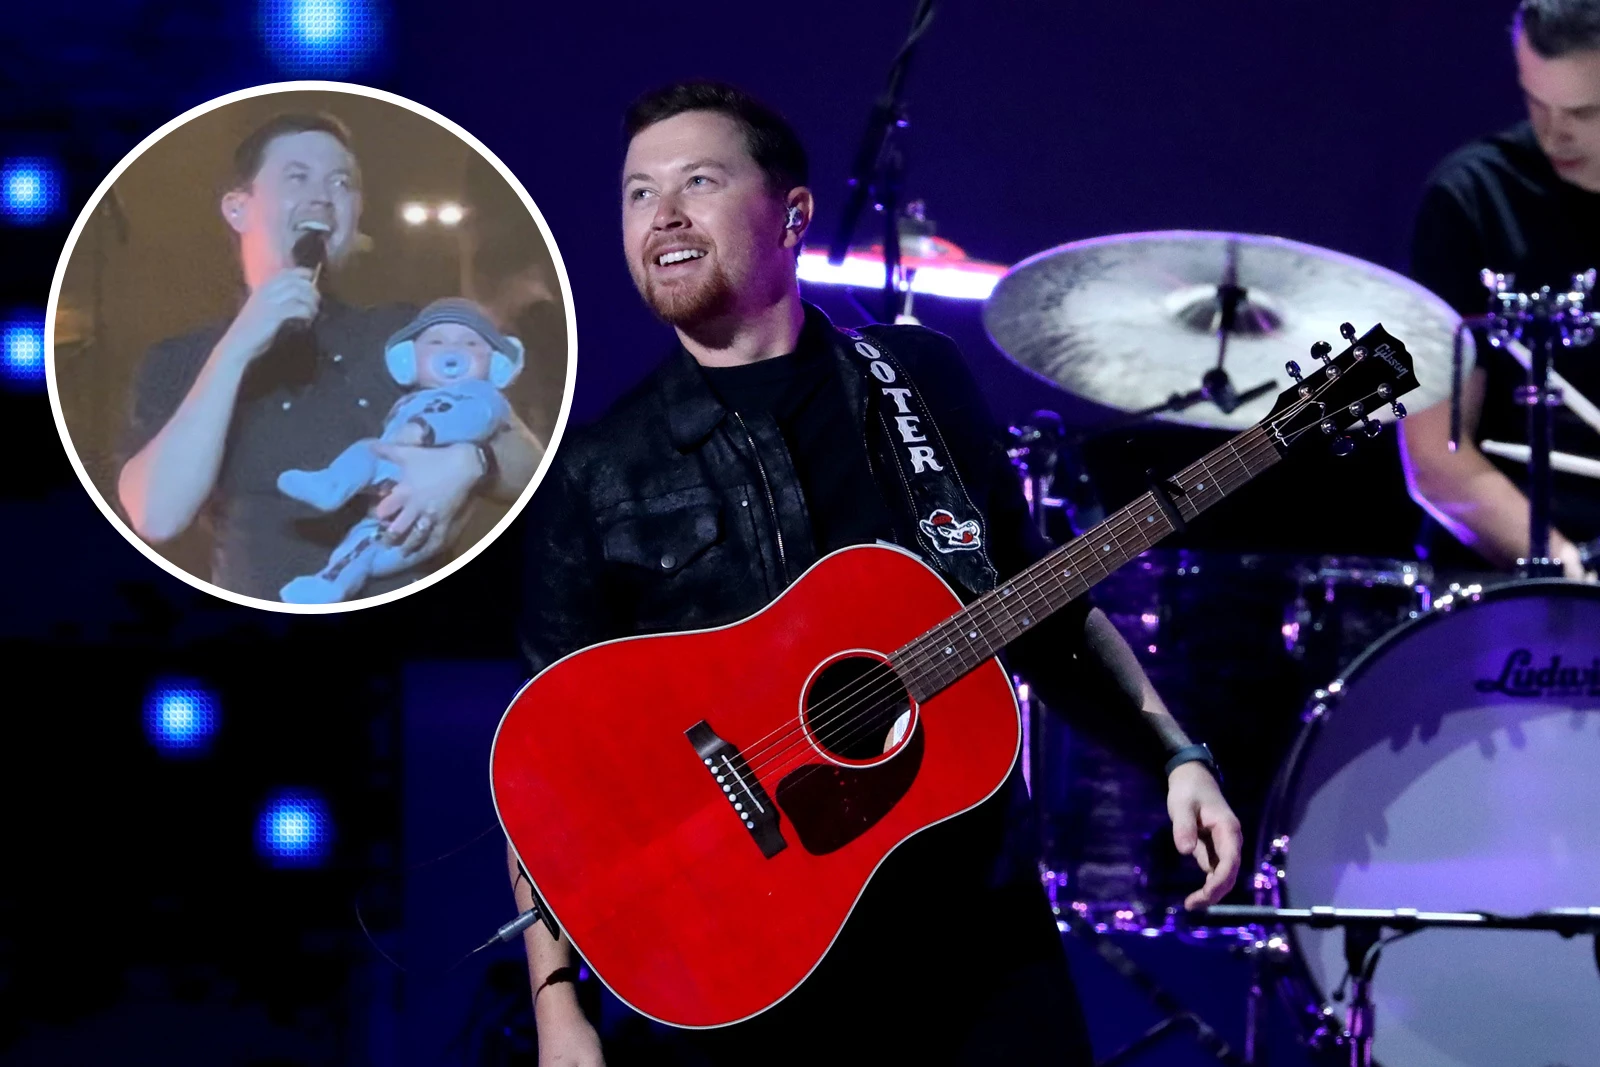 Scotty McCreery Brings His Adorable Baby Boy on Stage in Knoxville
